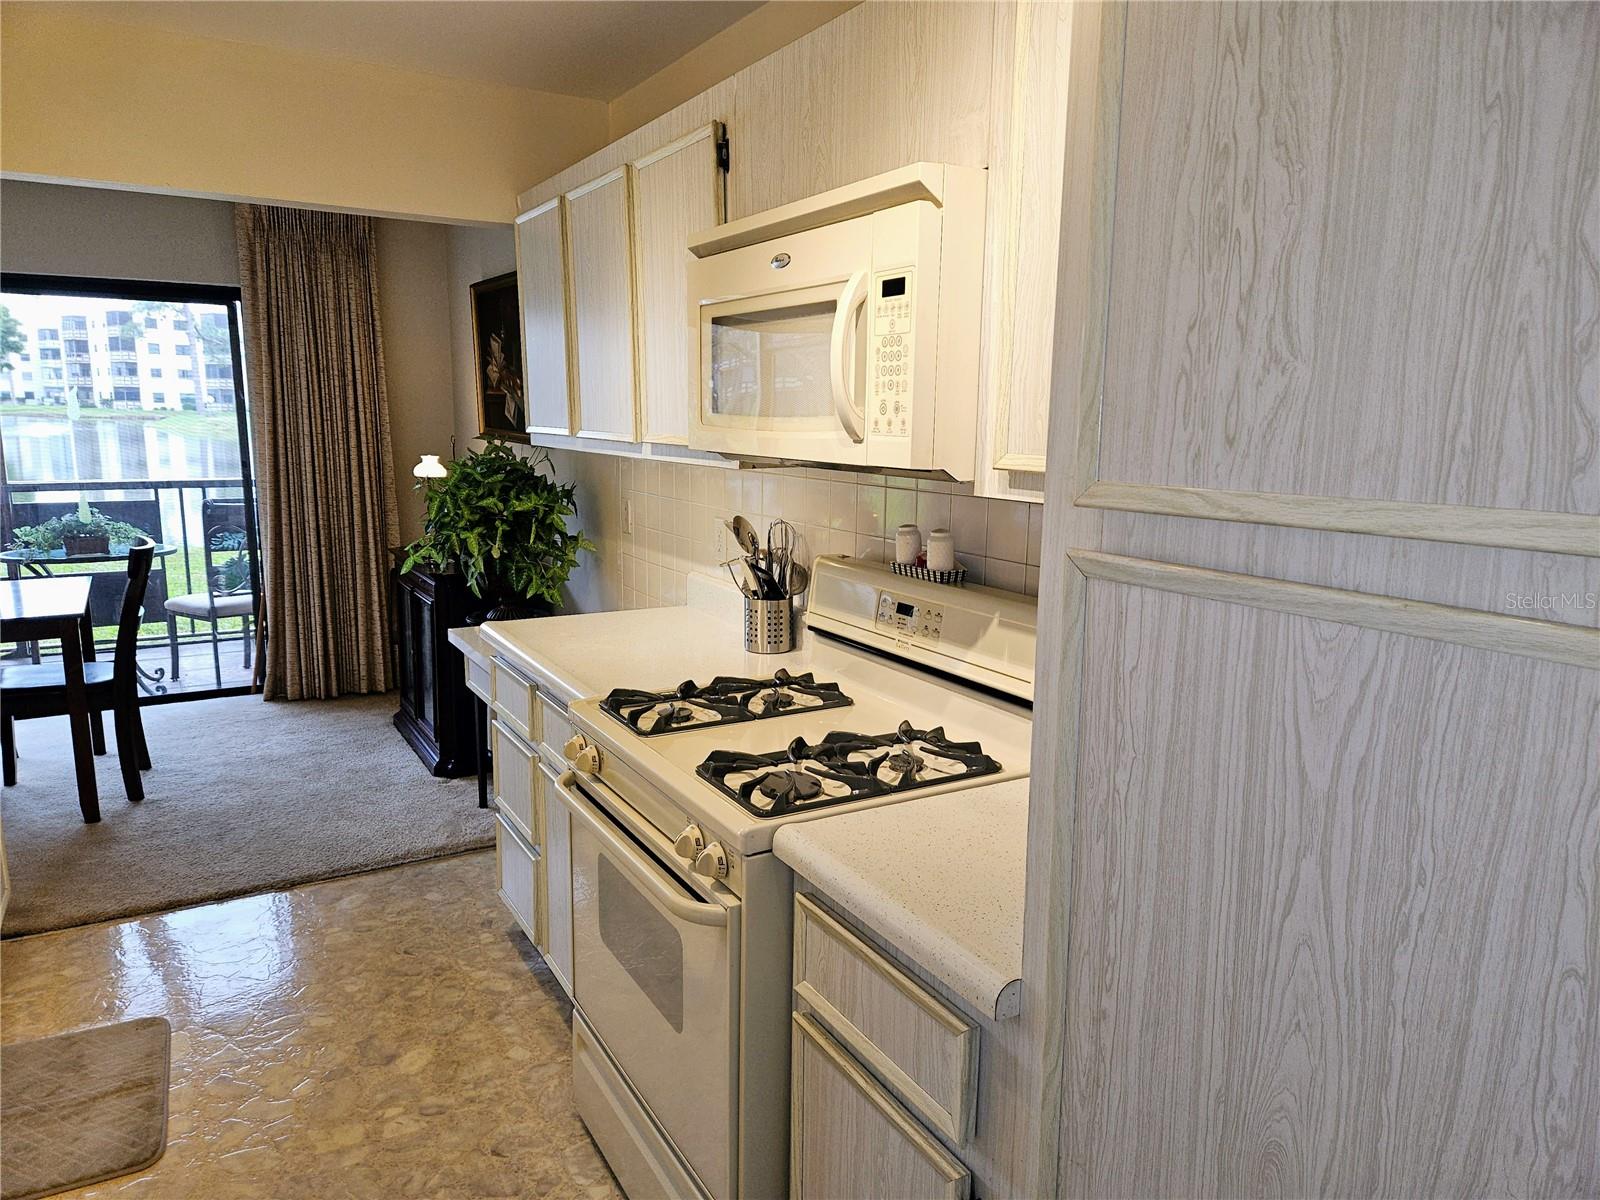 Kitchen Has Gas Range (Cost of Gas for Cooking and Heating is Included in the HOA Fees)